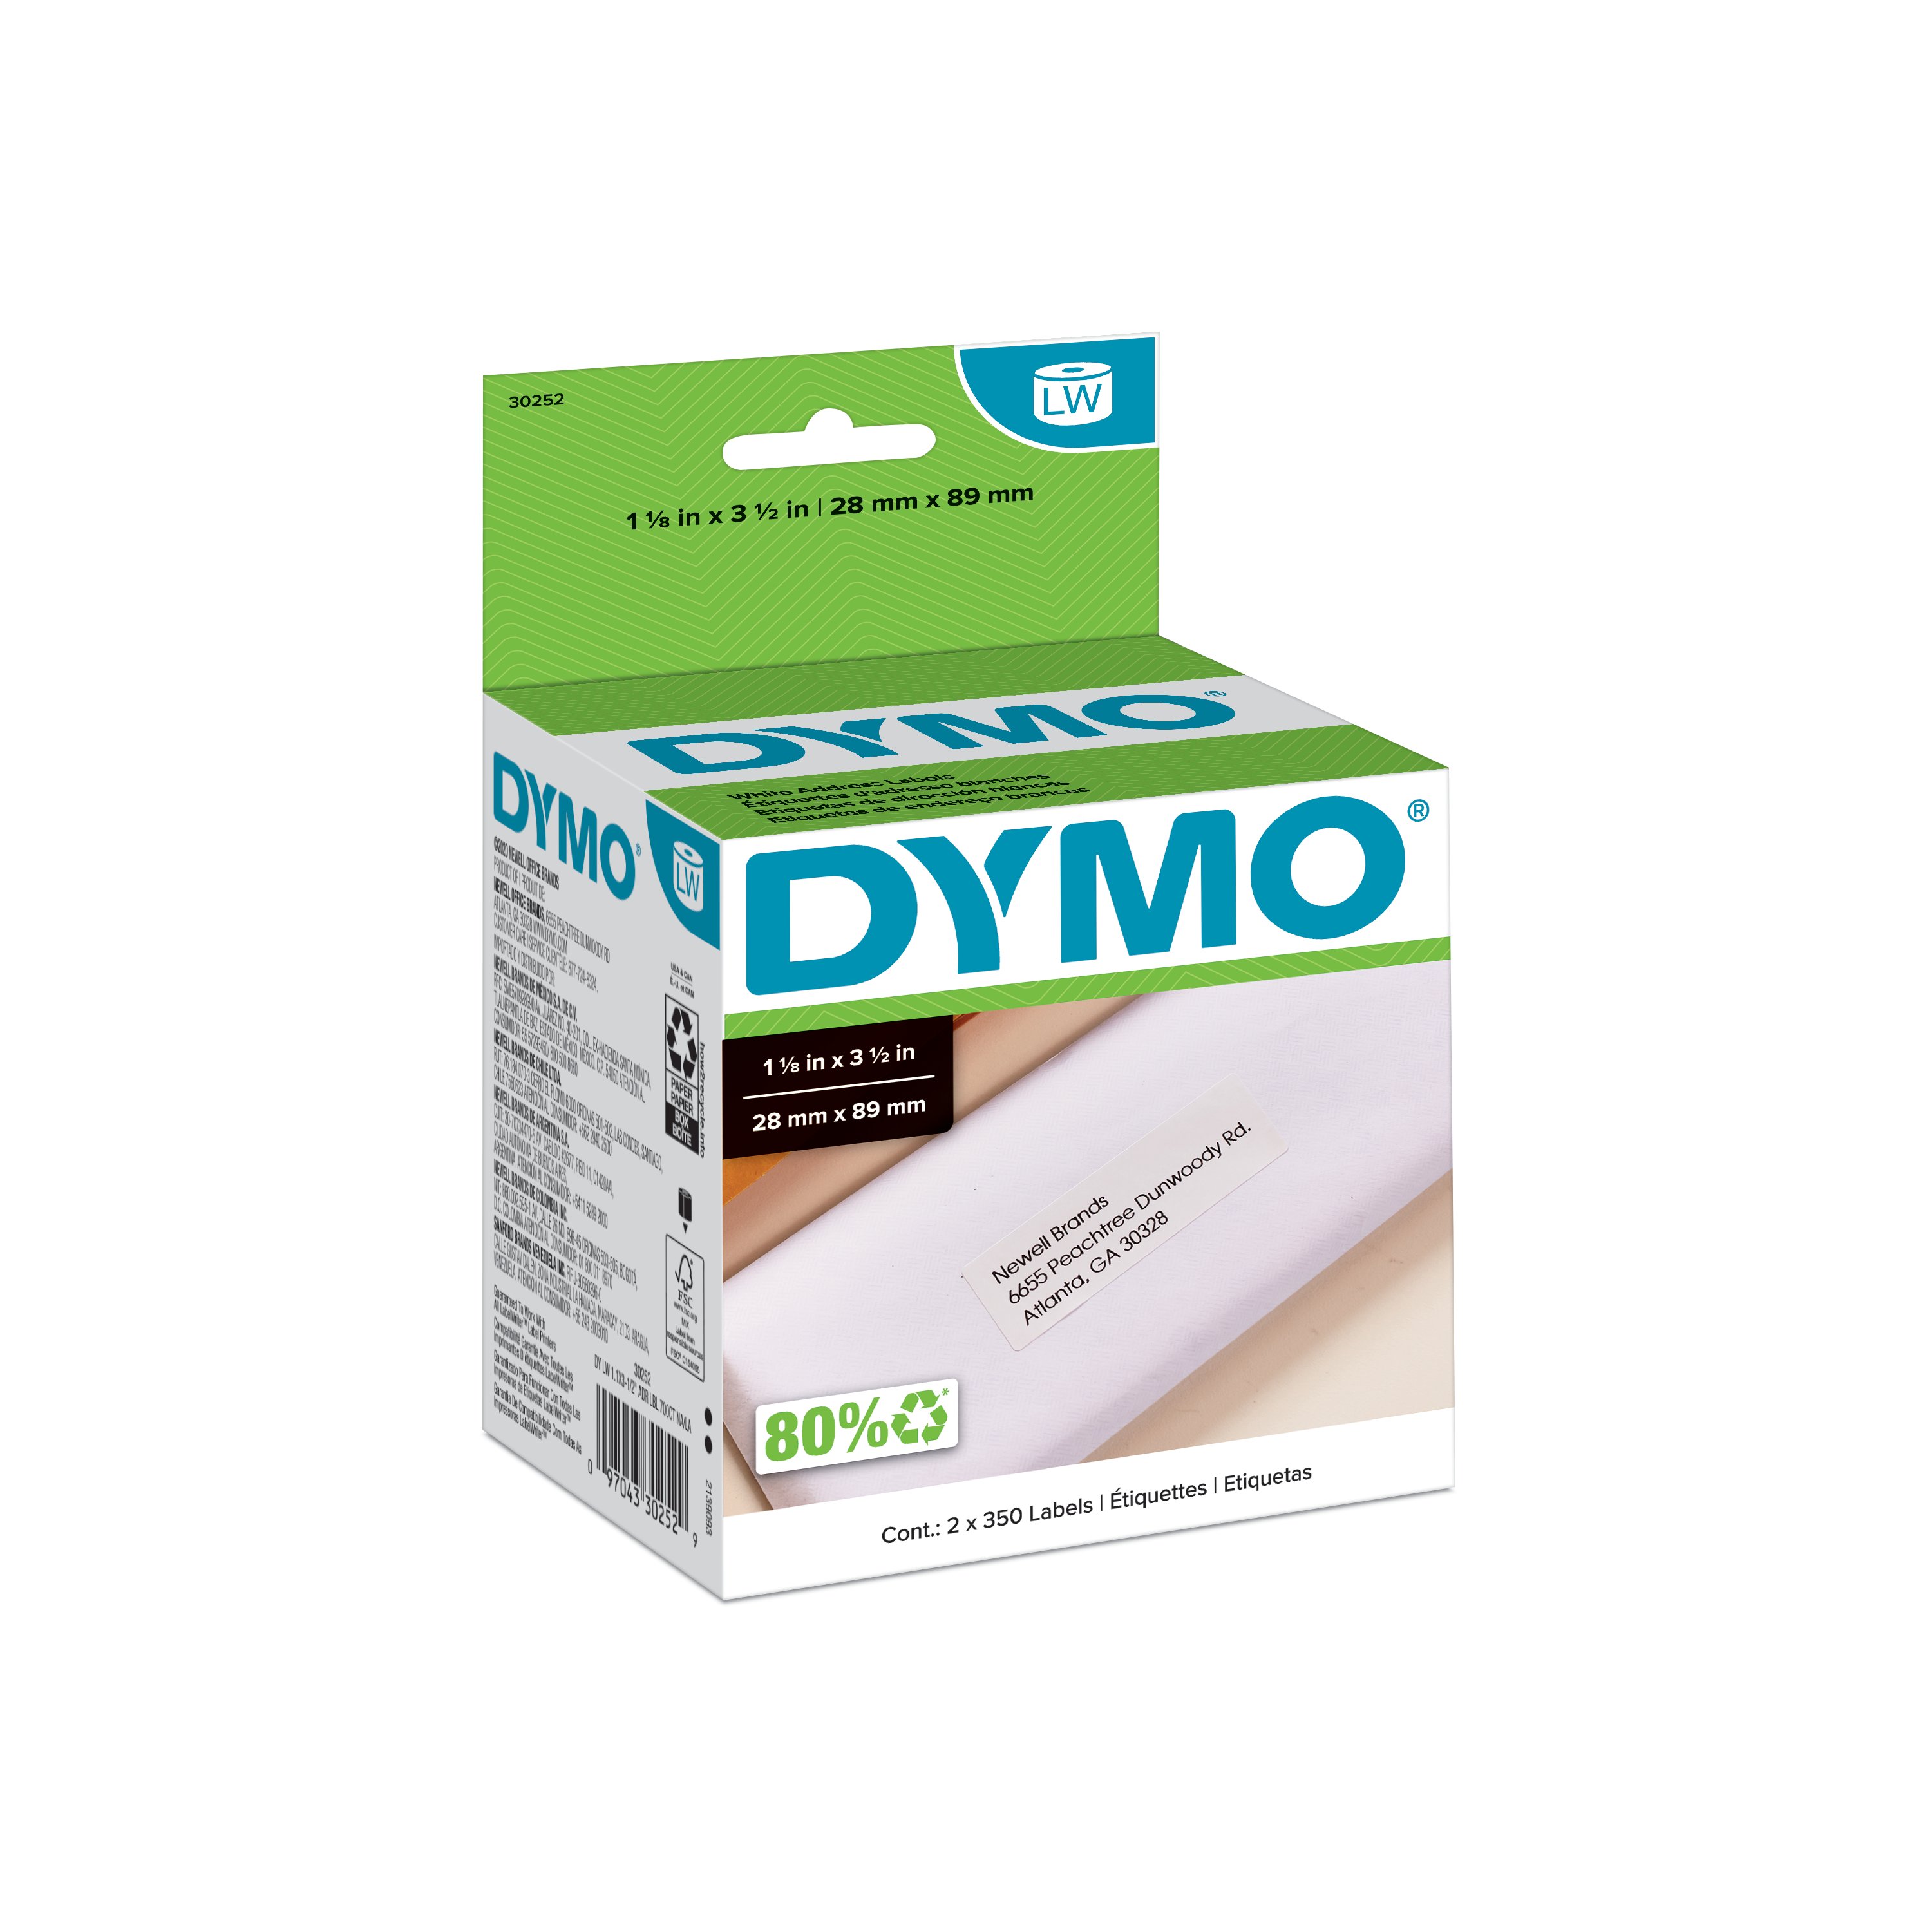 DYMO® LabelWriter® Duo 400 450 Twin Turbo 50 Roll of 30320 Large Address Labels 